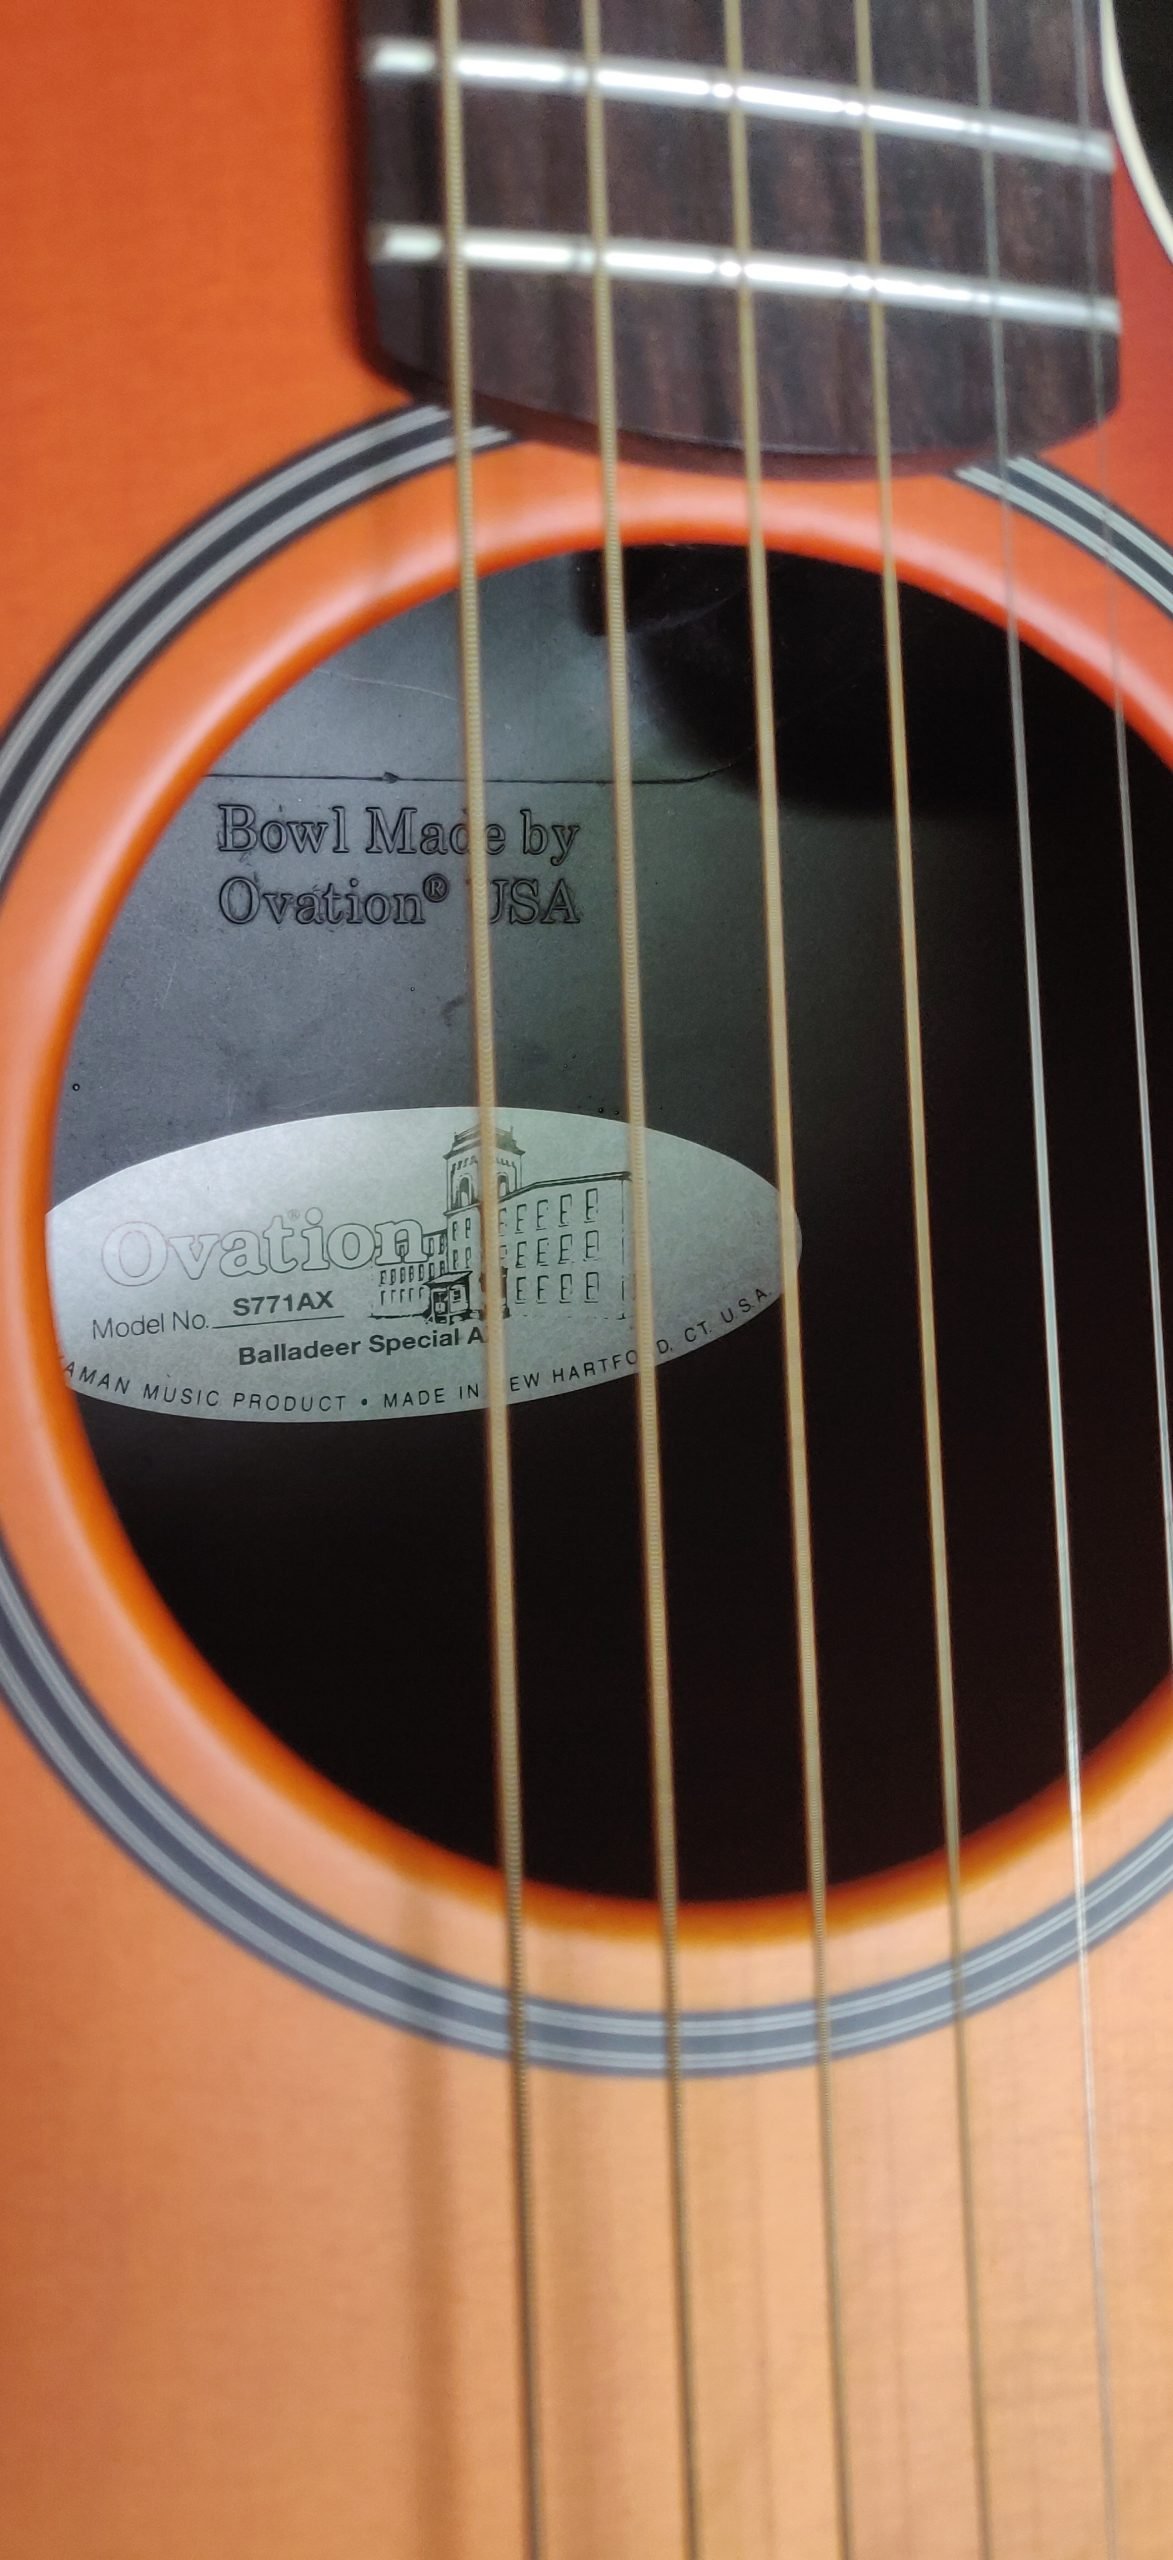 Are ovation guitars still being made?